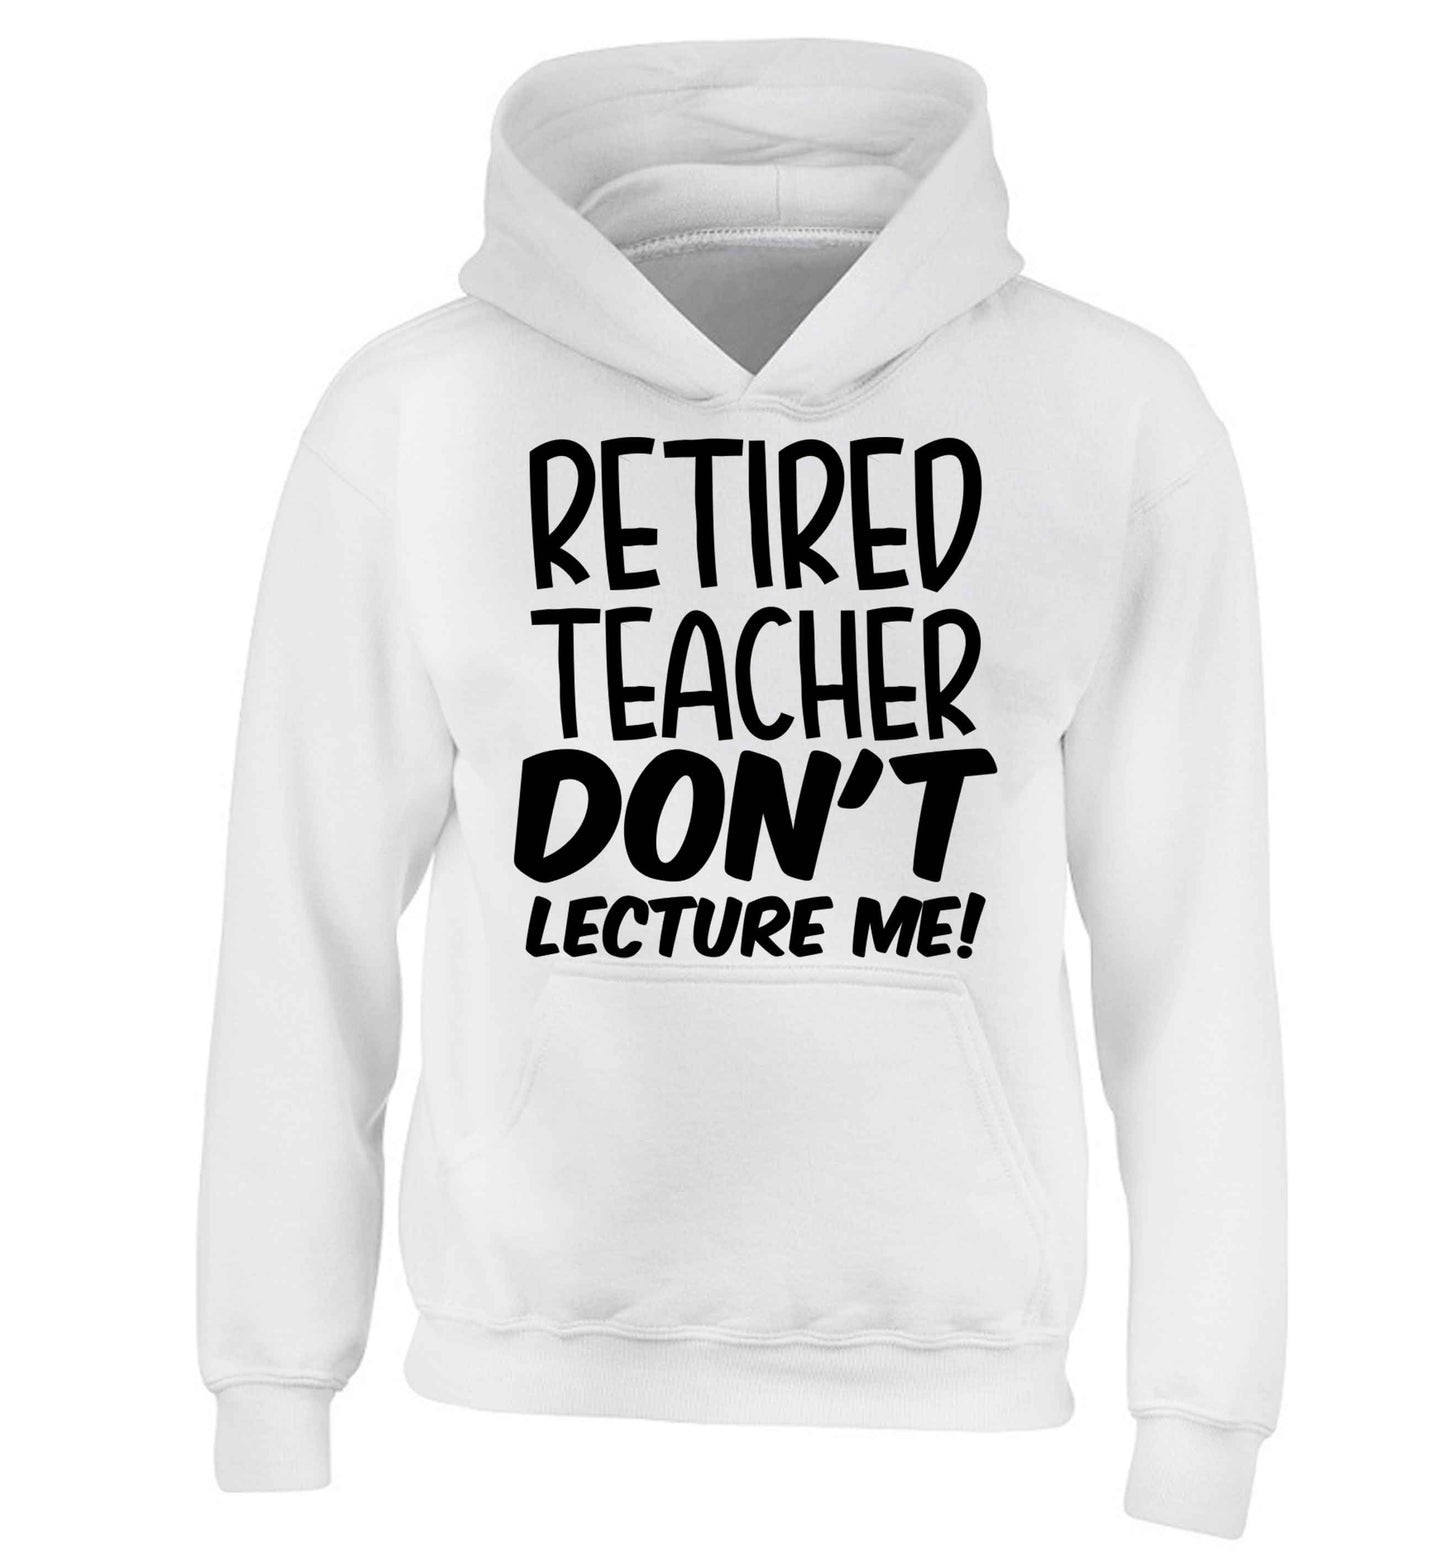 Retired teacher don't lecture me! children's white hoodie 12-13 Years